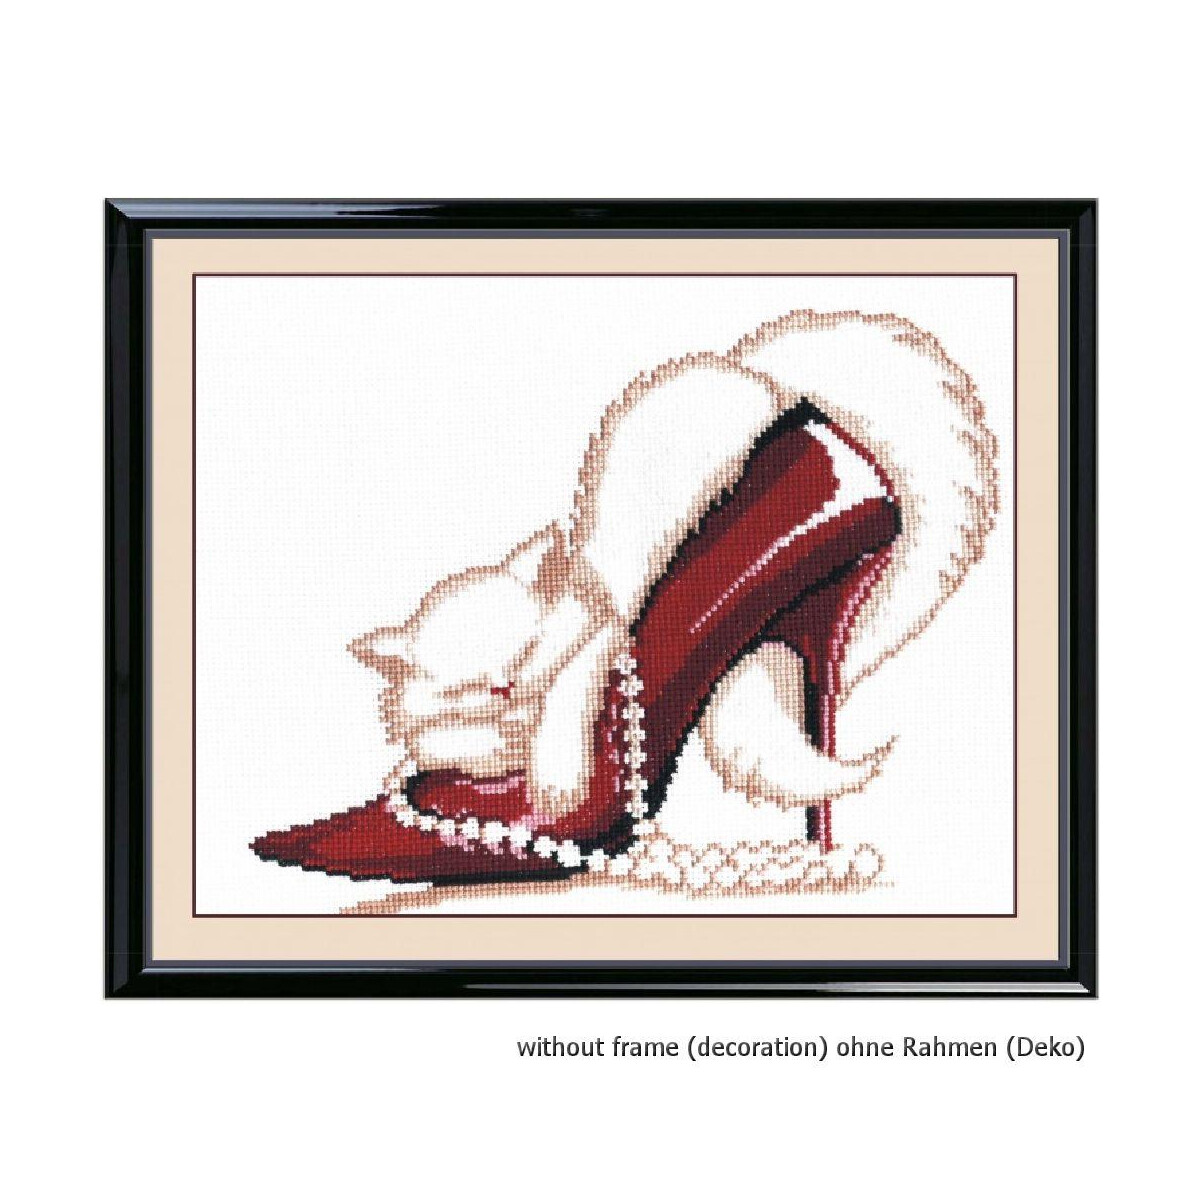 Oven counted cross stitch kit "Shoe", 30x25cm, DIY